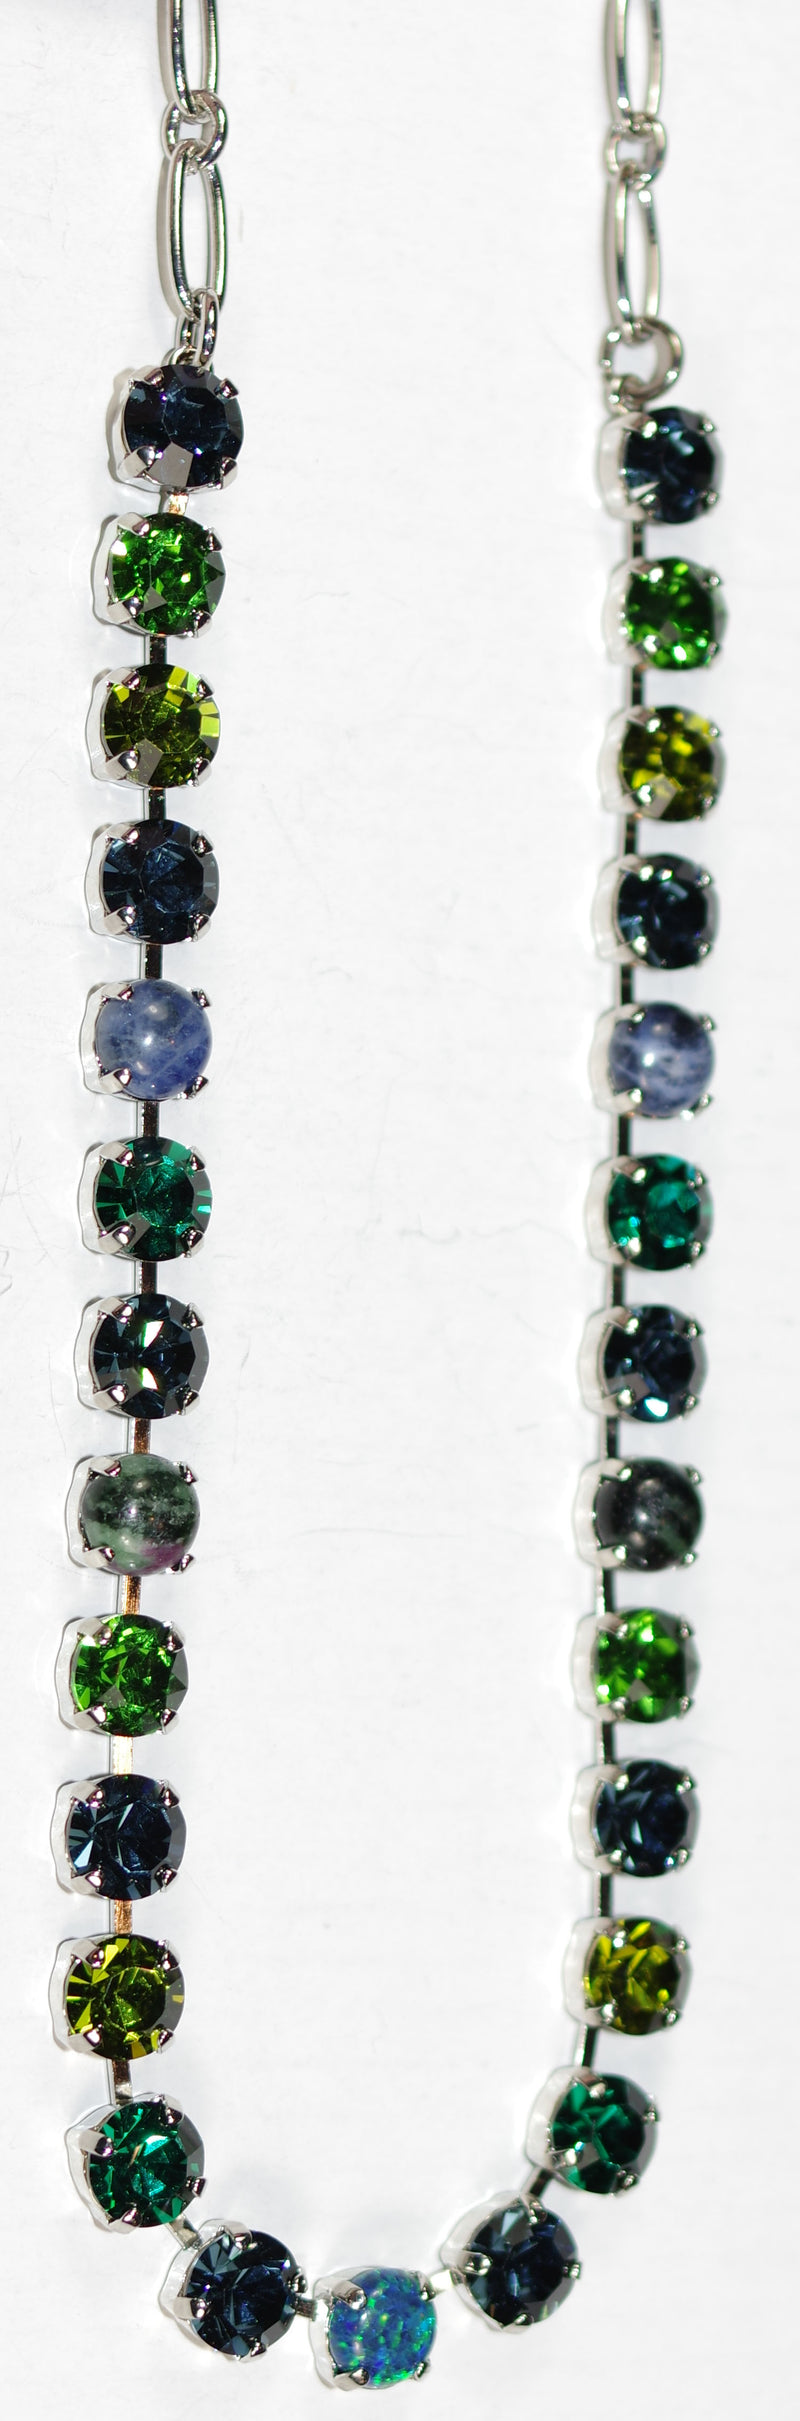 MARIANA NECKLACE BETTE CHAMOMILE: blue, green, opal, natural 1/4" stones in silver rhodium setting, 17" adjustable chain